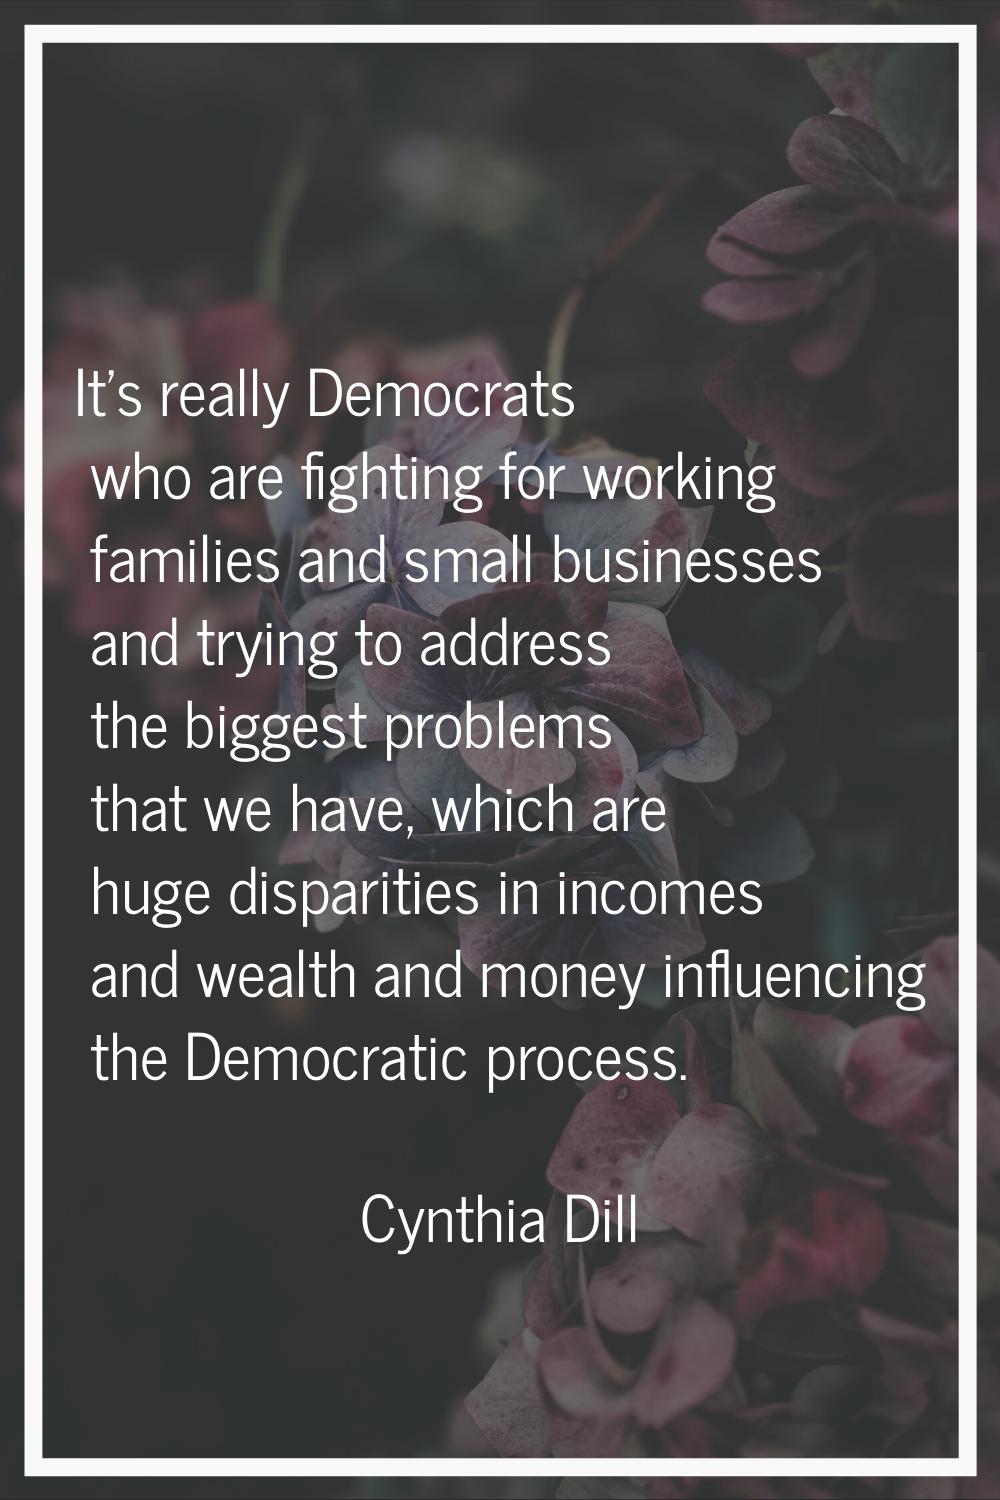 It's really Democrats who are fighting for working families and small businesses and trying to addr